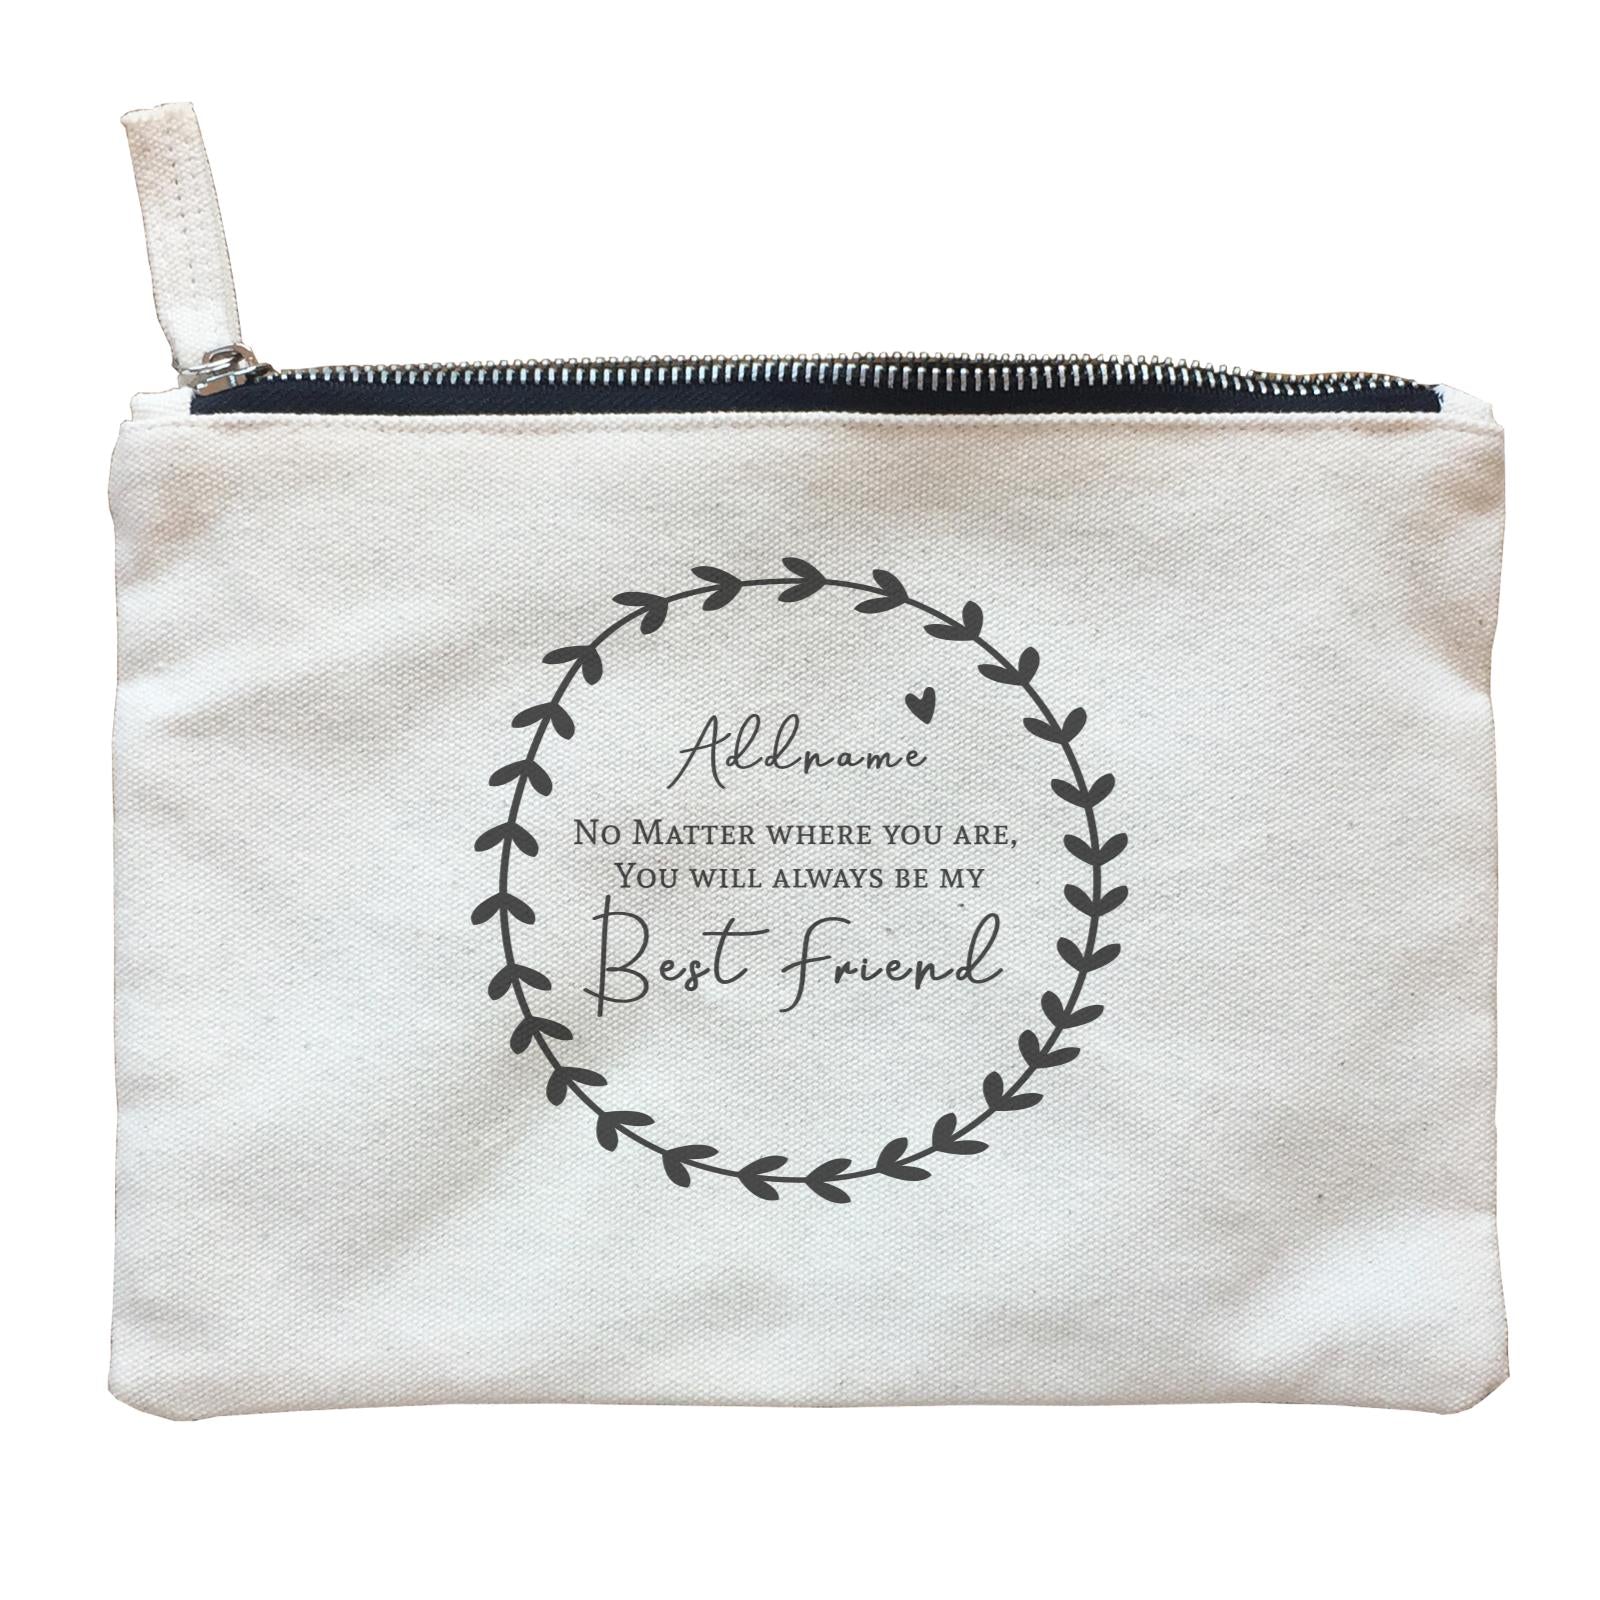 Best Friends Quotes Wreath Addname You Will Always Be My Best Friend Zipper Pouch